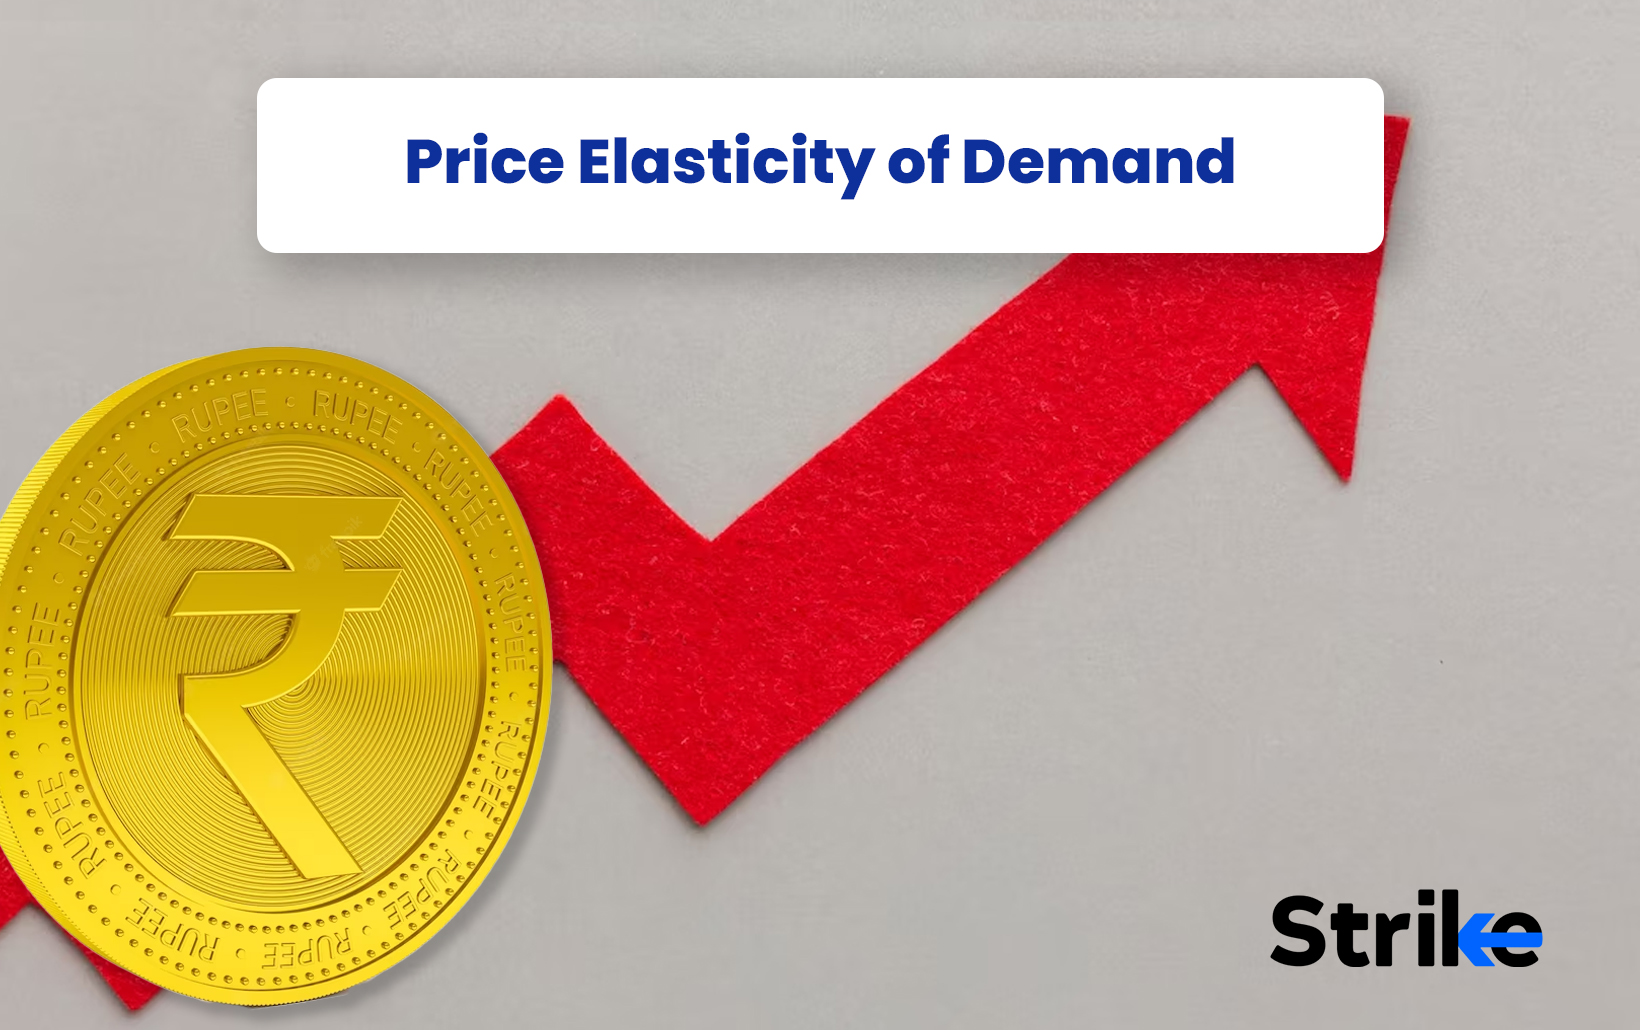 Price Elasticity of Demand: Definition, Importance, and Factors affecting it